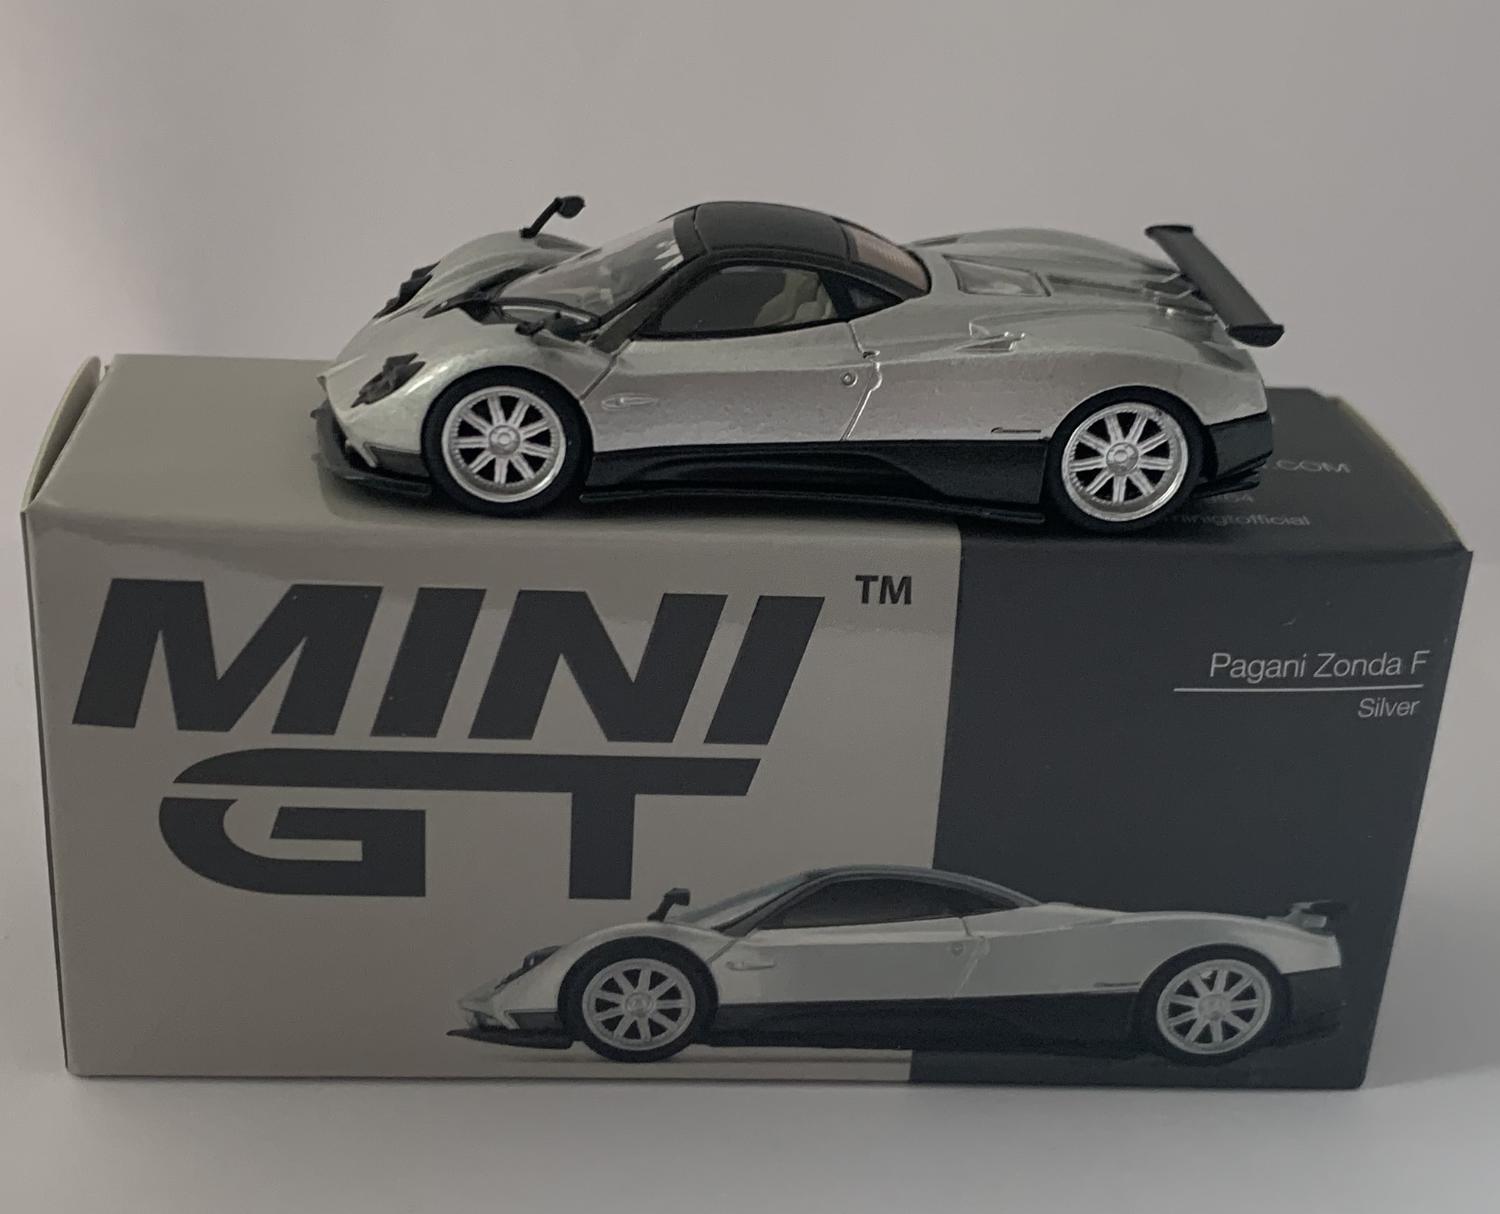 A good reproduction of the Pagani Zonda F  with detail throughout, all authentically recreated. The model is presented in a box, the car is approx. 7 cm long and the box is 10 cm long